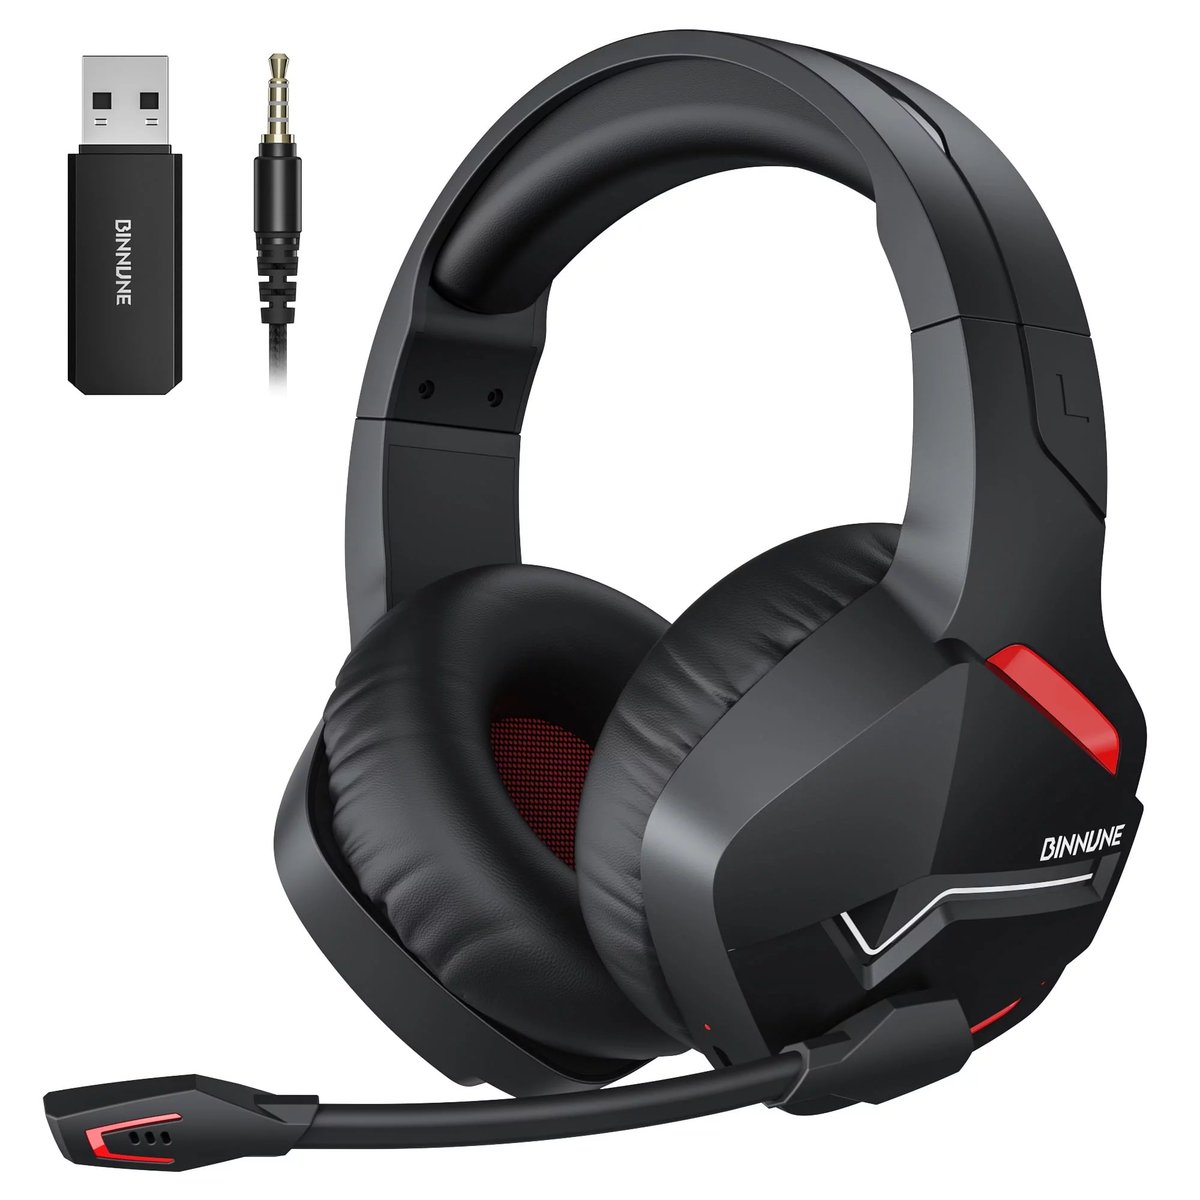 🏃‍♀️⚡𝐖𝐚𝐥𝐦𝐚𝐫𝐭 𝐅𝐥𝐚𝐬𝐡 𝐏𝐢𝐜𝐤 𝐃𝐞𝐚𝐥 - Wireless Gaming Headset with Microphone ➡️Save over $20.10!⚡🏃‍♀️
mavely.app.link/e/dl8HfIo4GFb

#DealOrNoDeal #OnSale #Deals #dealdector